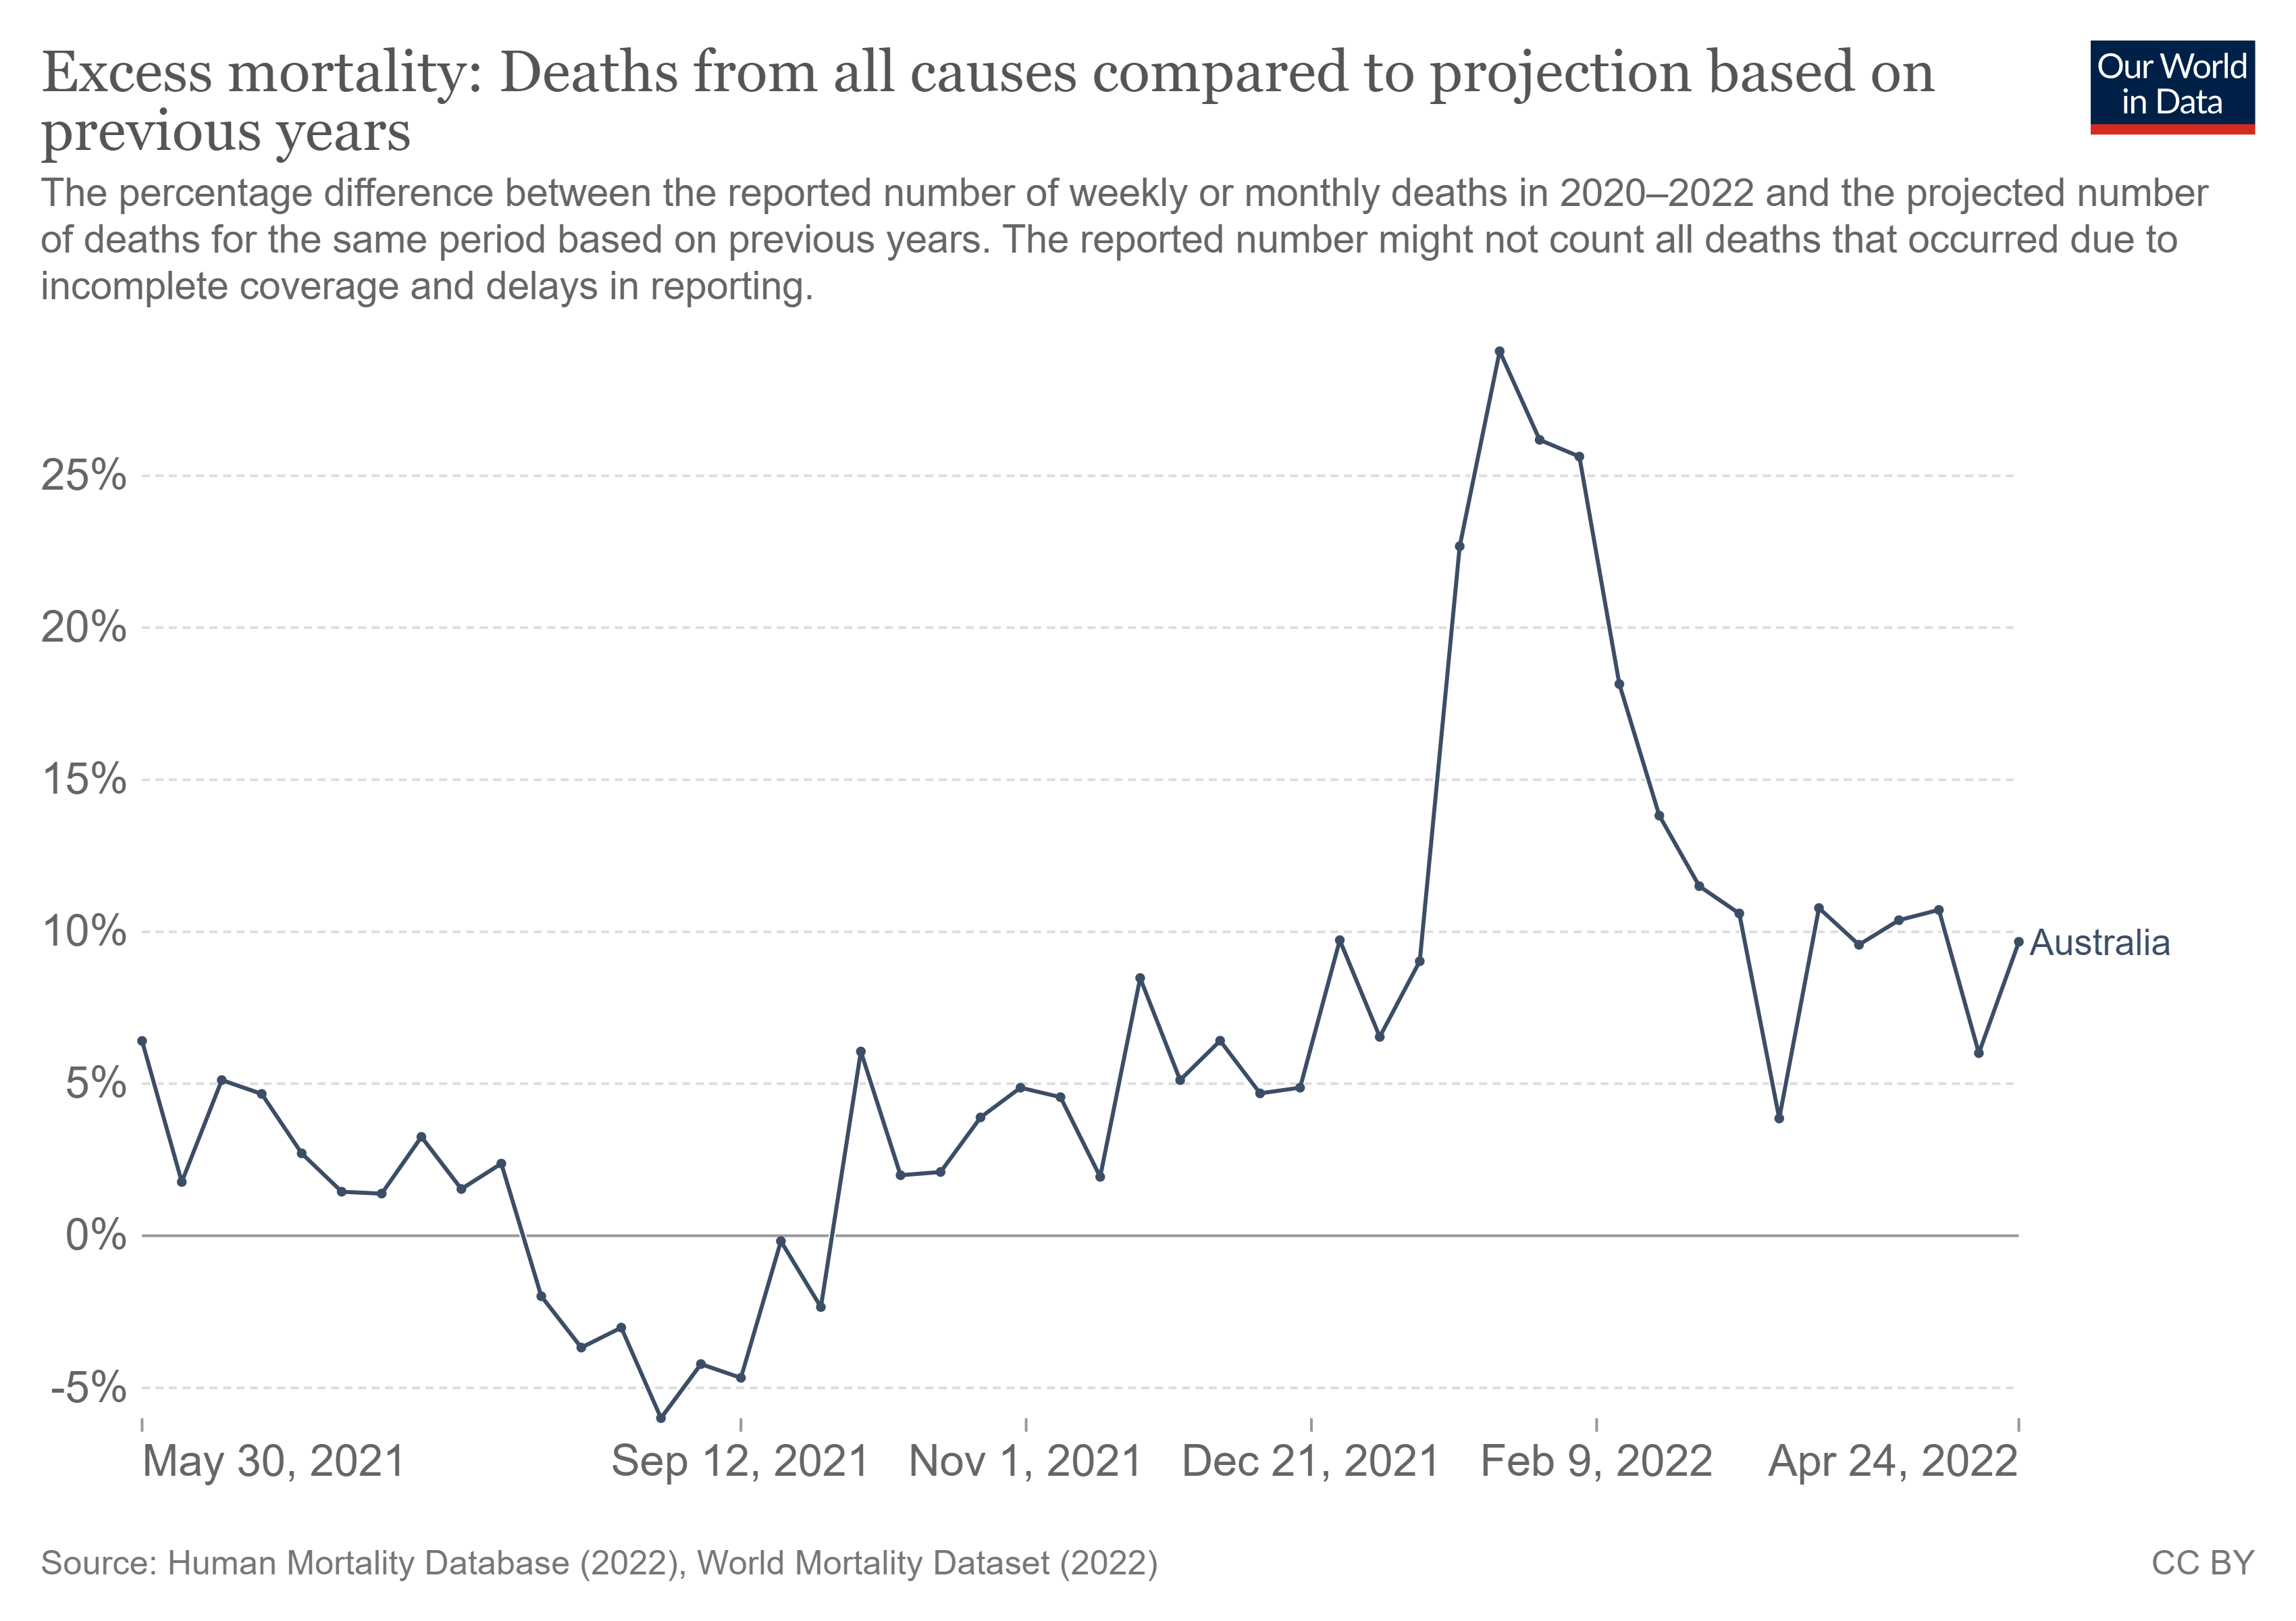 Serious anomaly in excess deaths in Australia